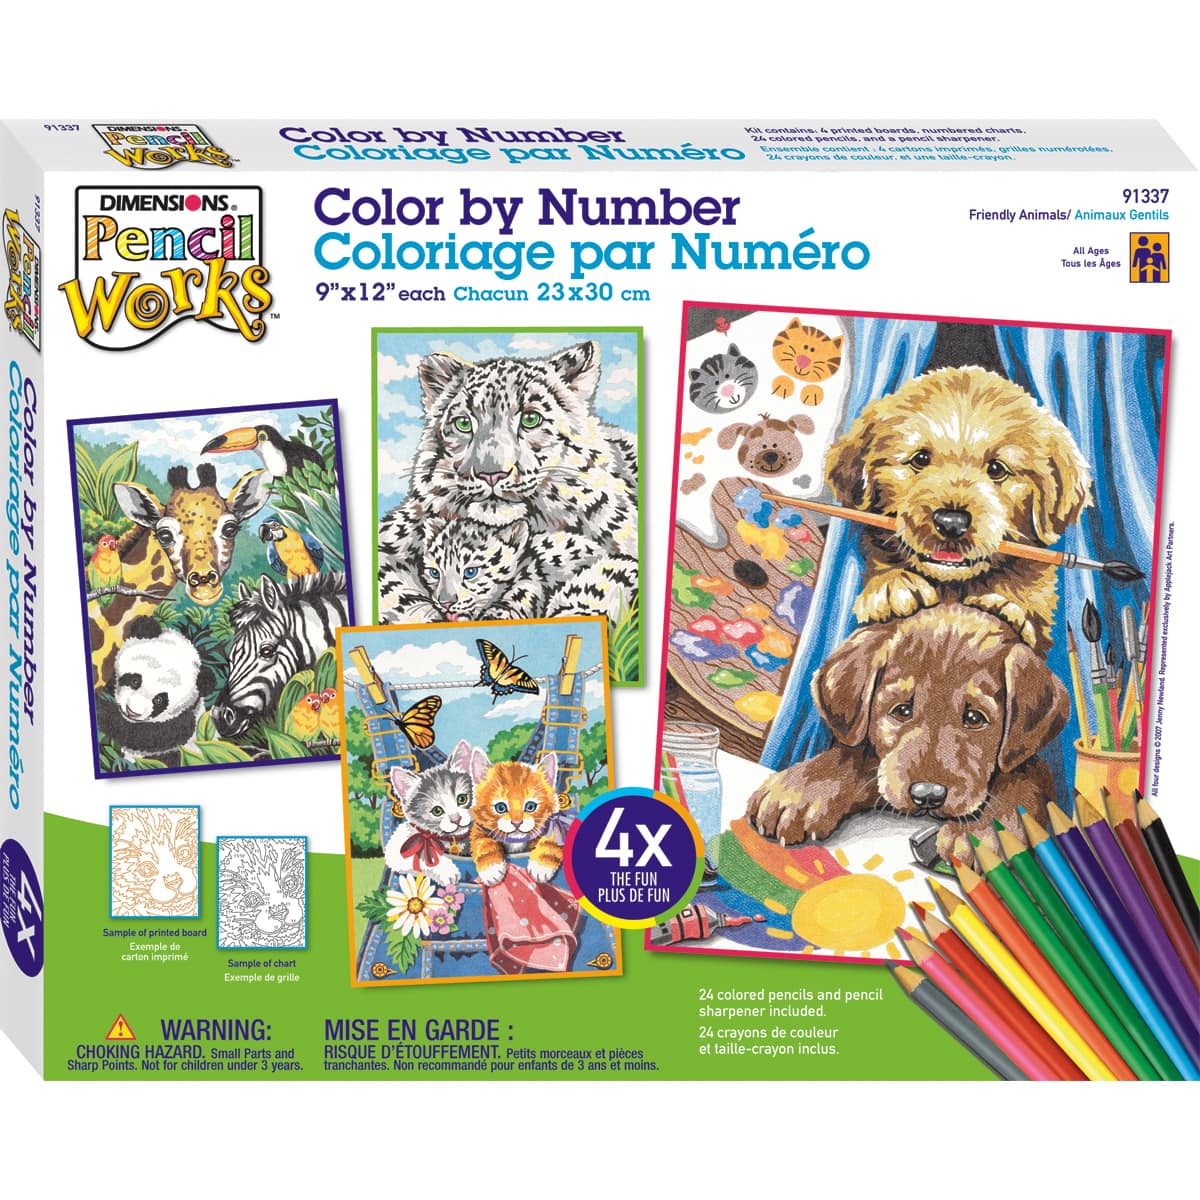 3D Art Coloring Kit, Color-by-number